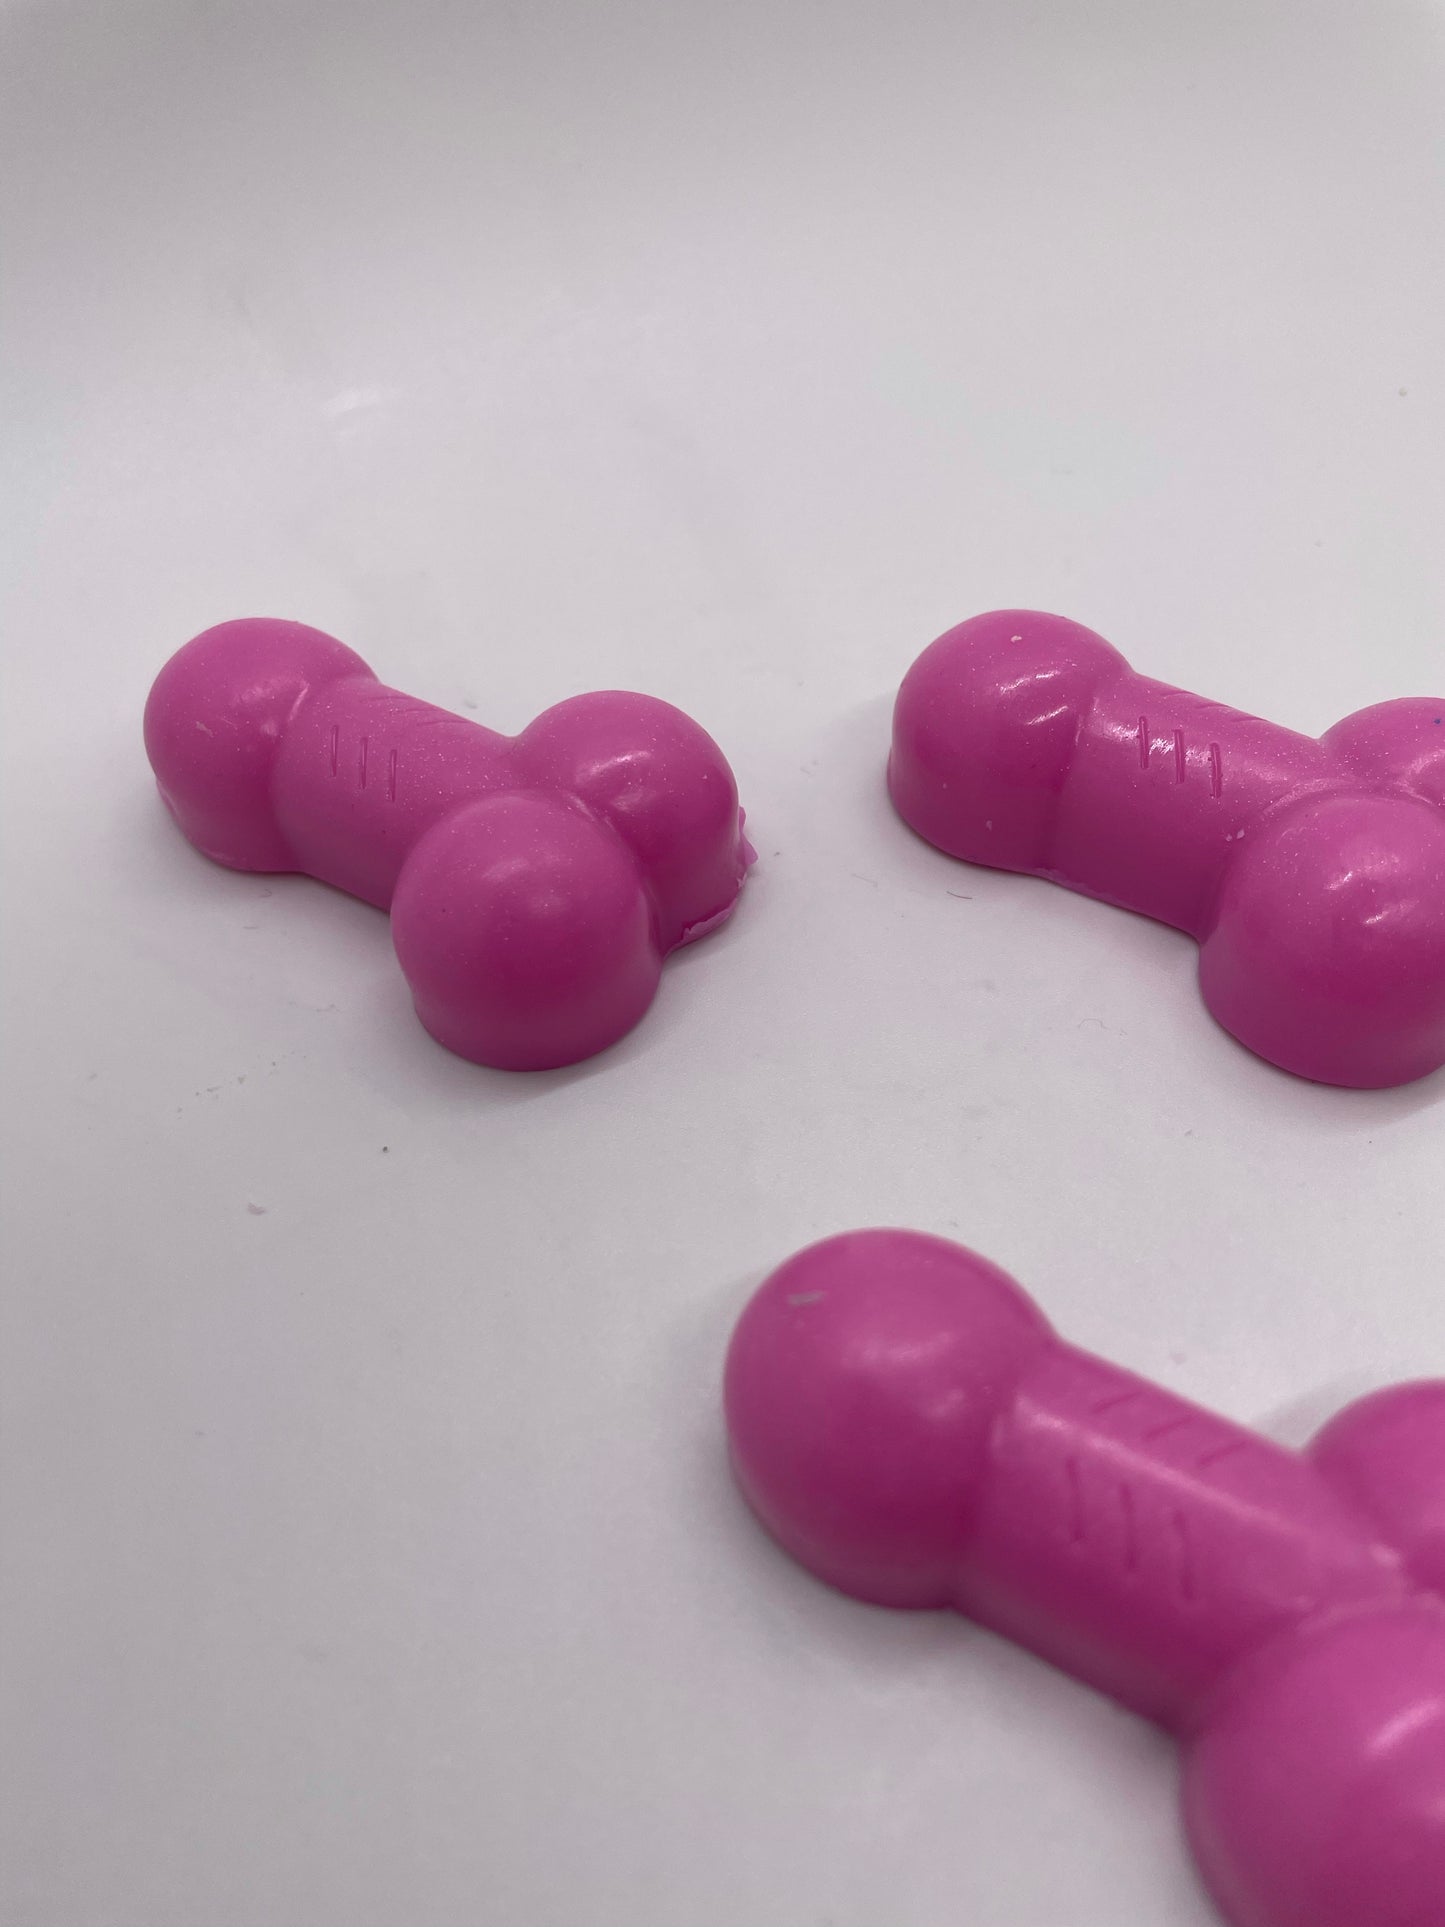 XRATED Penis Soap Bar VARIES IN COLORS